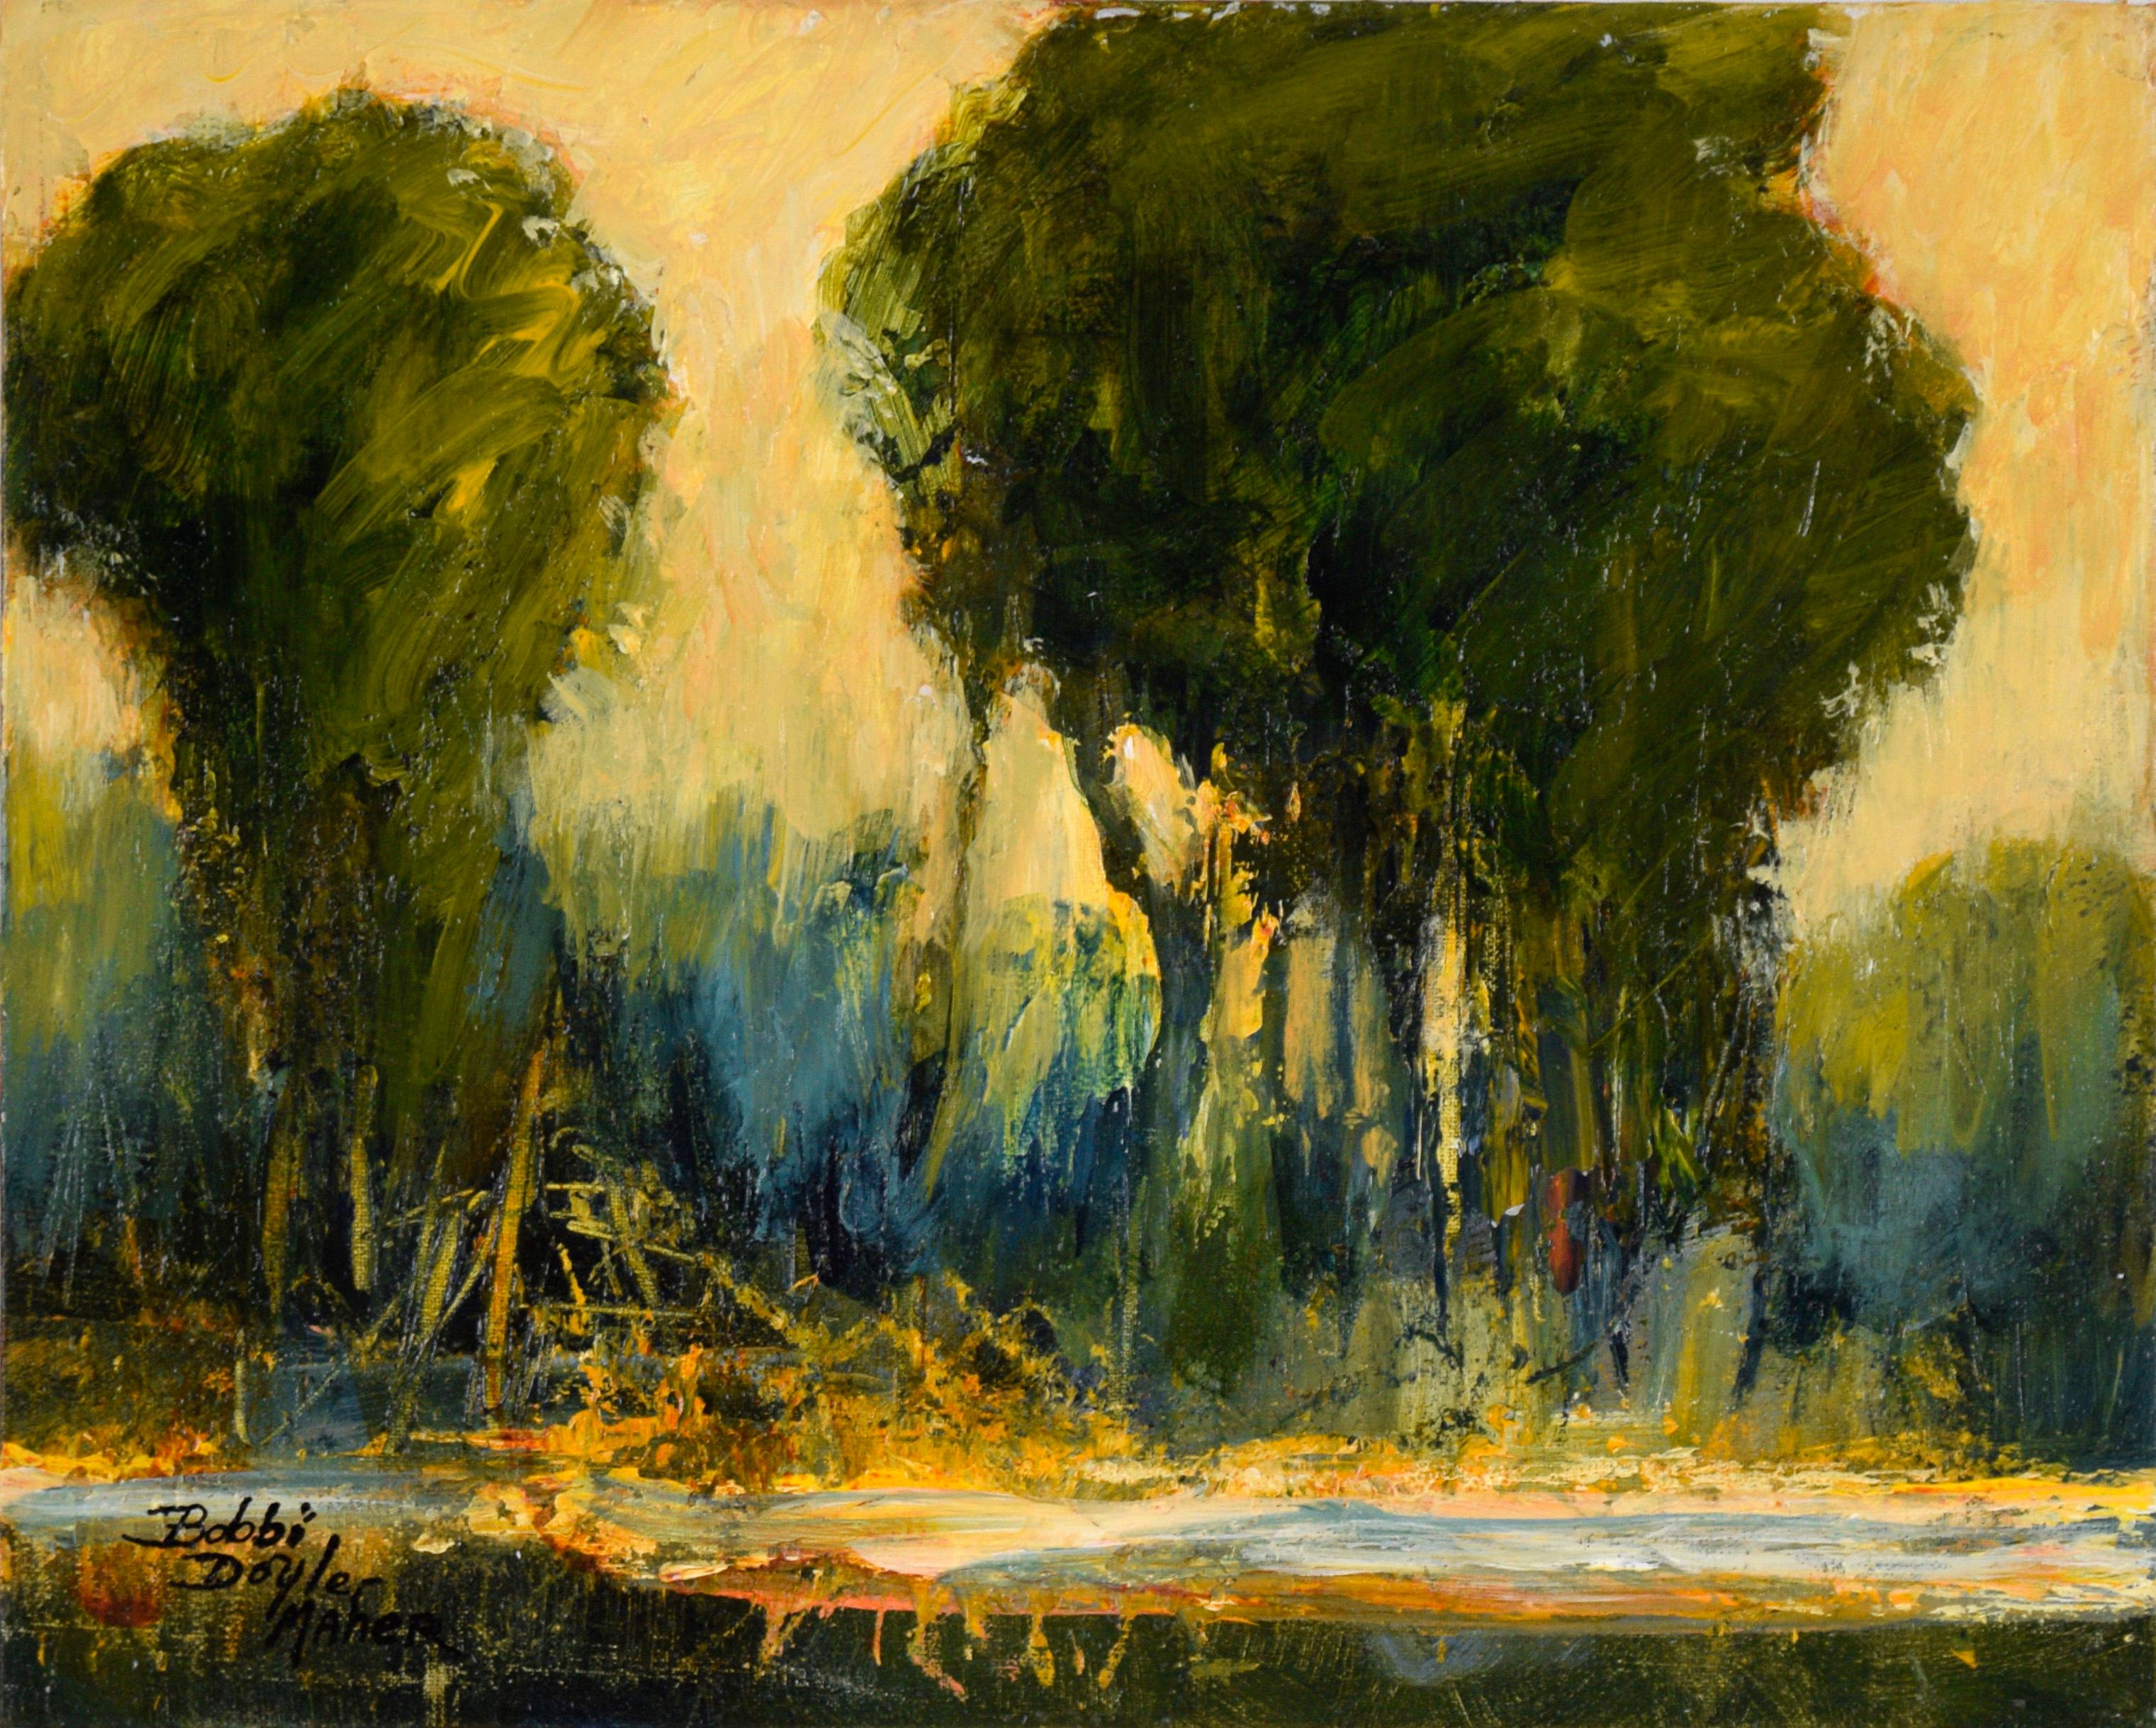 Bobbi Doyle-Maher Landscape Painting - Trees by the Pond at Sunset - Landscape in Acrylic on Artist's Board